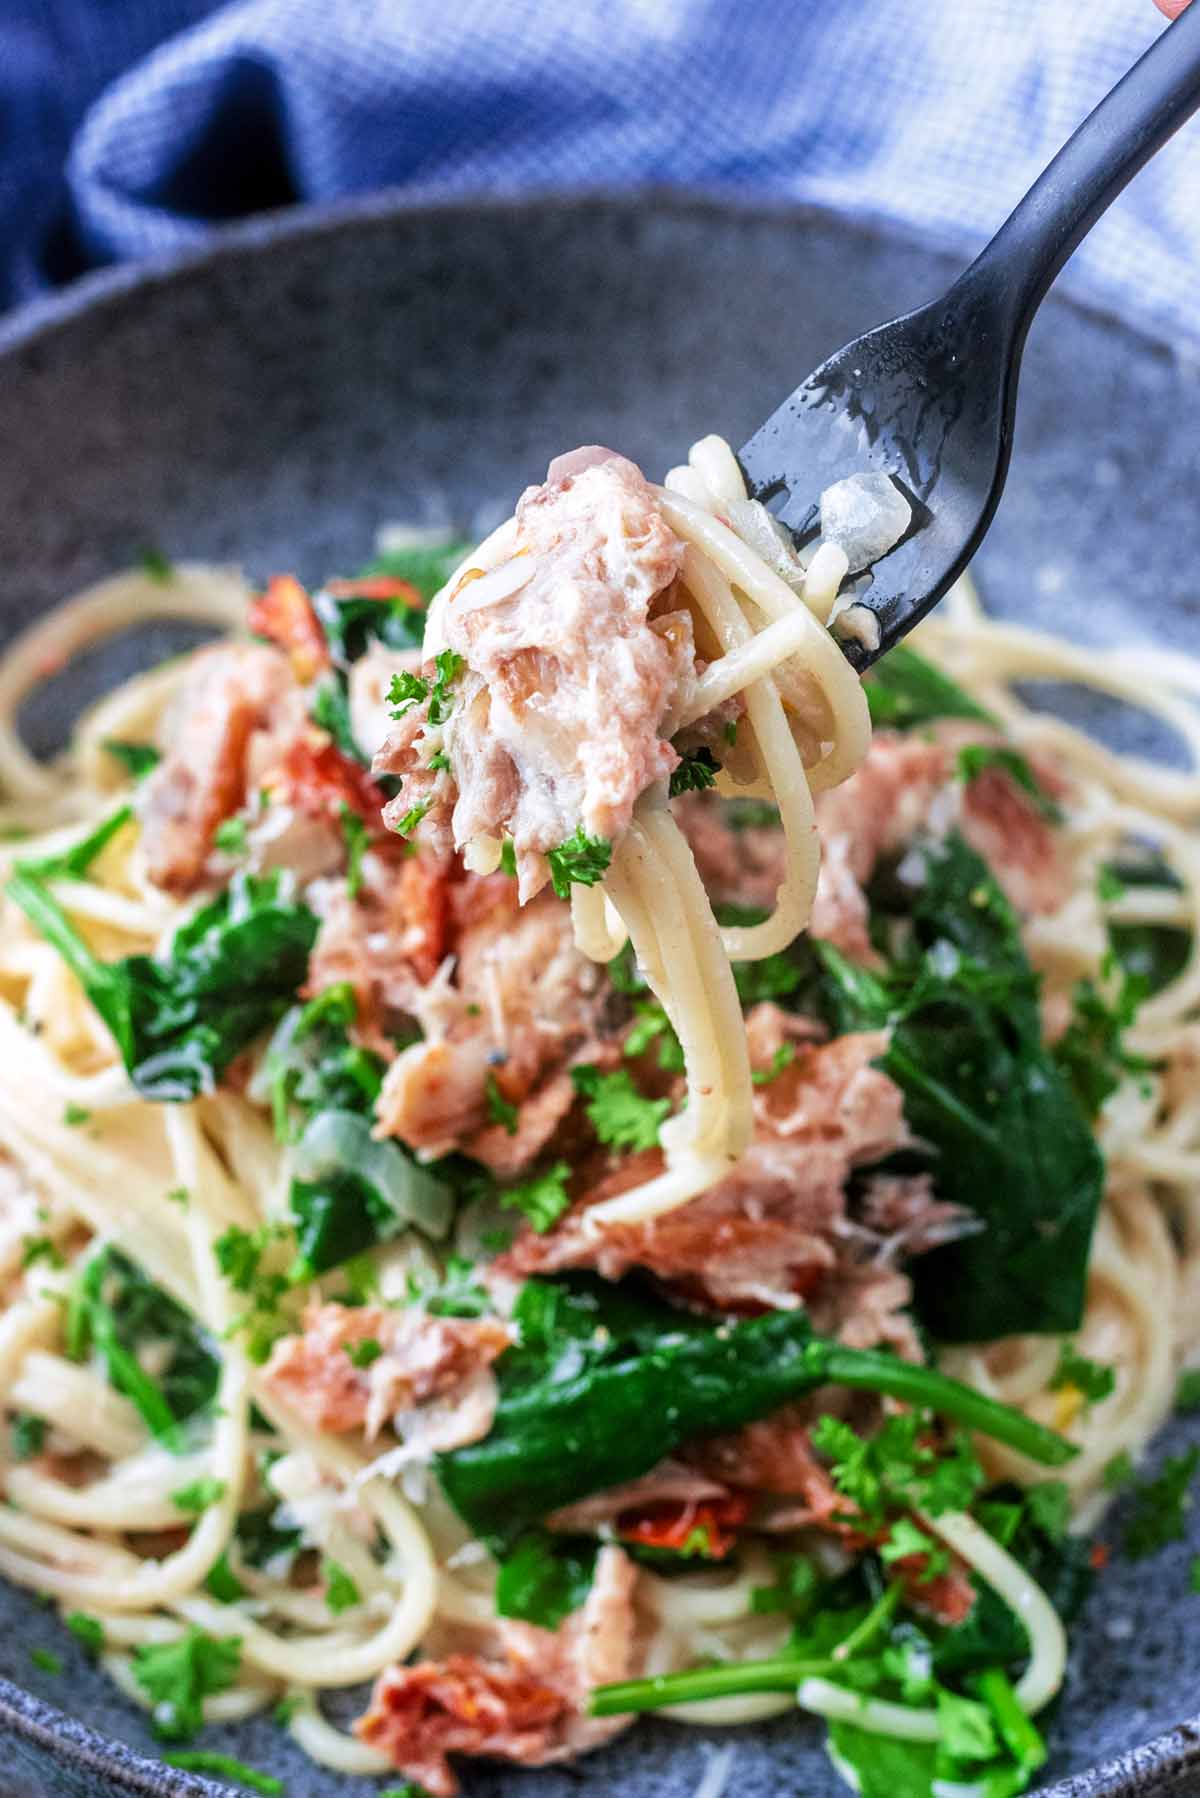 A fork lifting some pasta and flaked mackerel from a bowl.